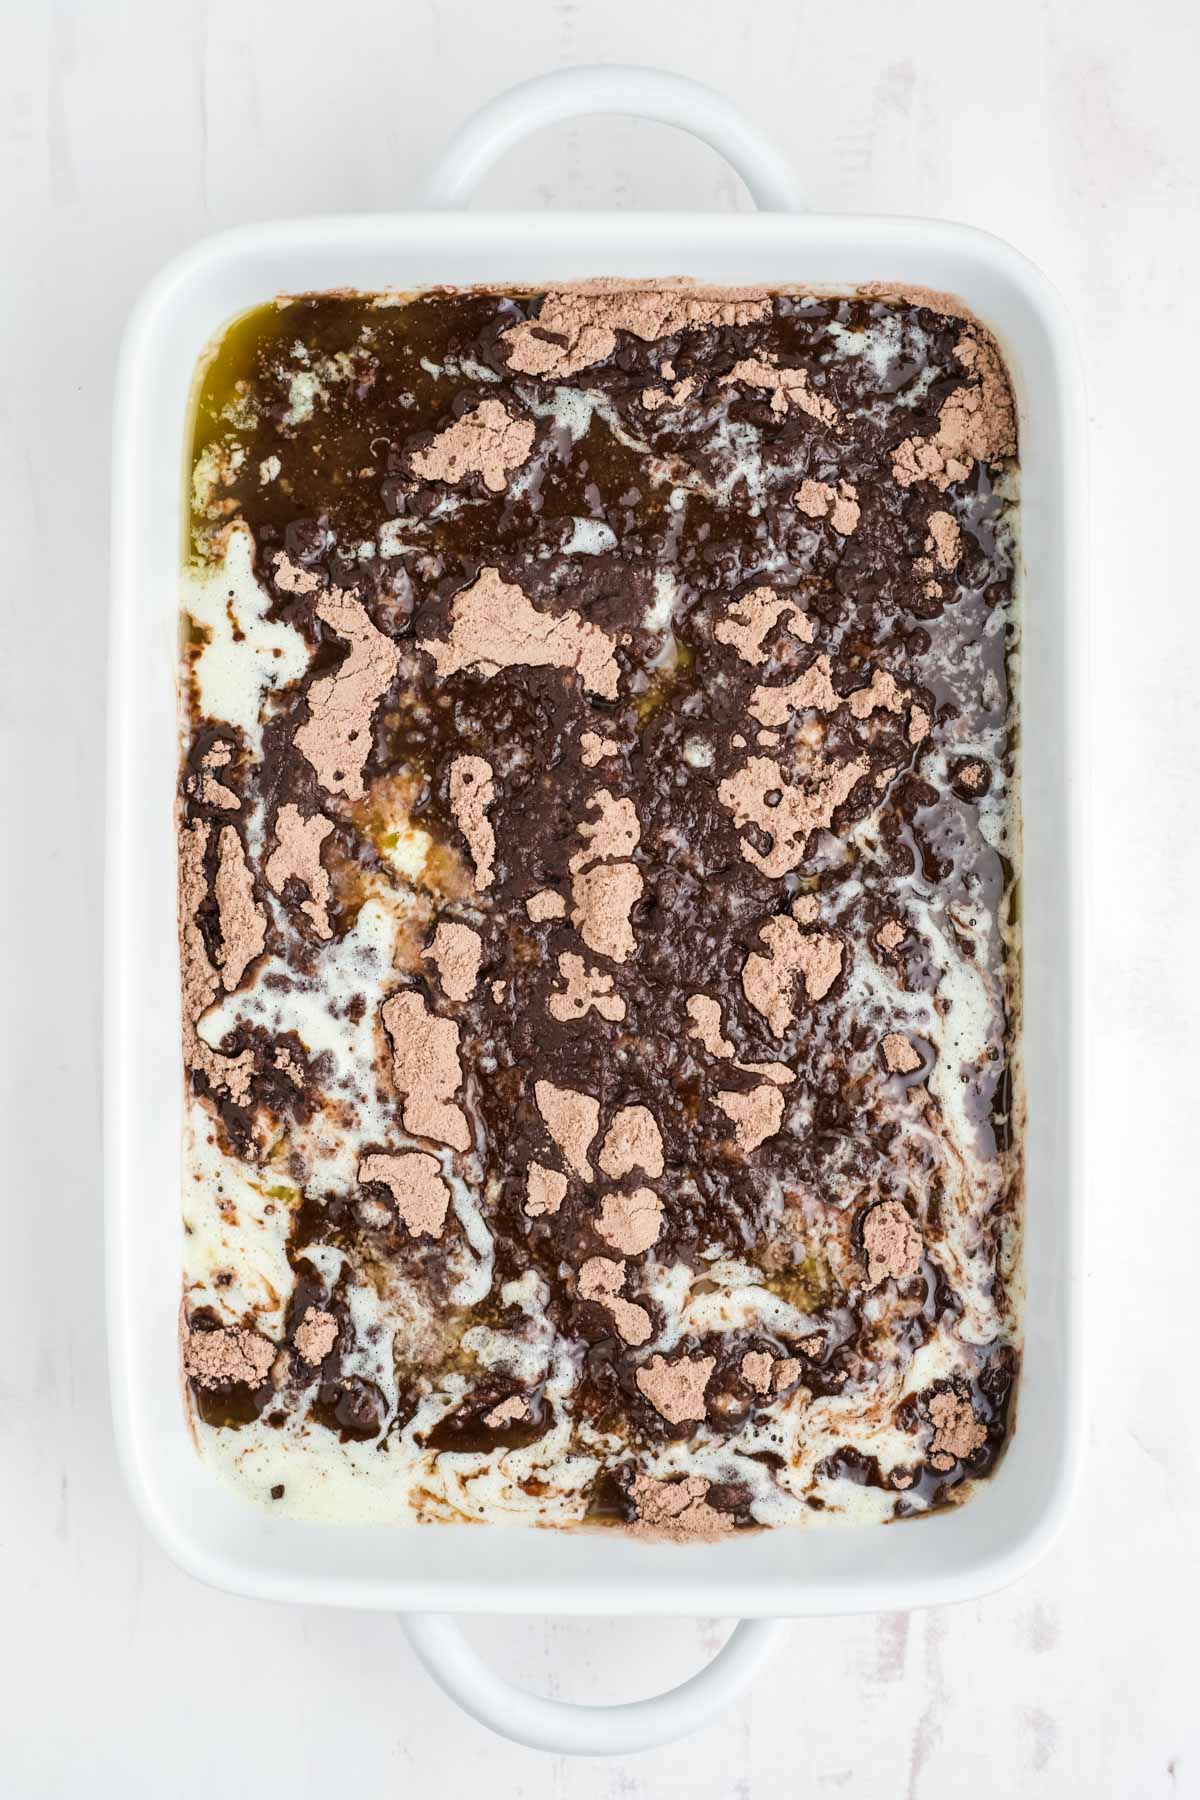 Melted butter drizzled over chocolate cake mix in a baking dish.